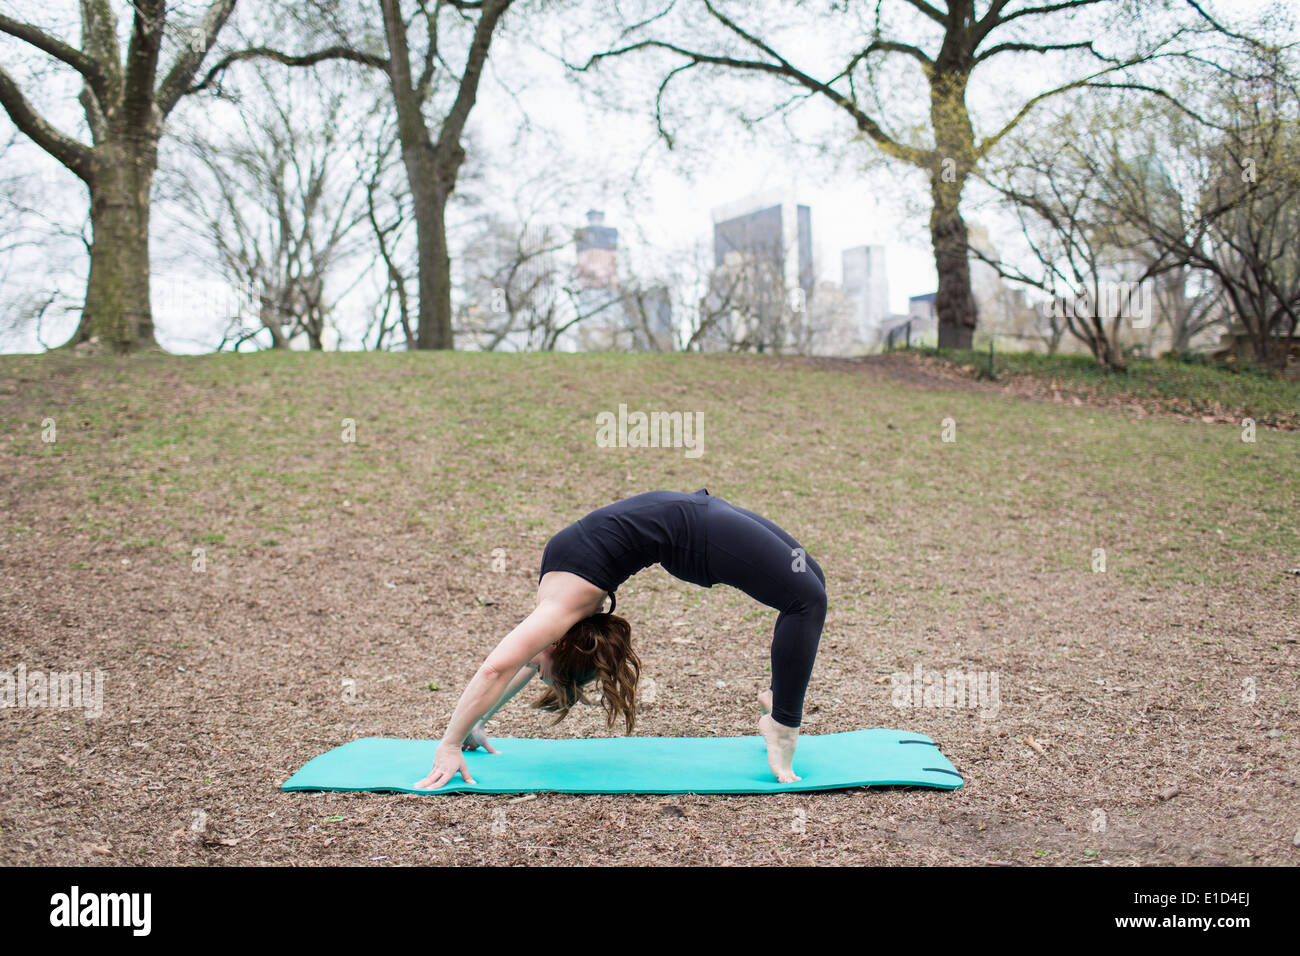 A young woman in Central Park, in a black leotard and leggings, doing yoga. Stock Photo